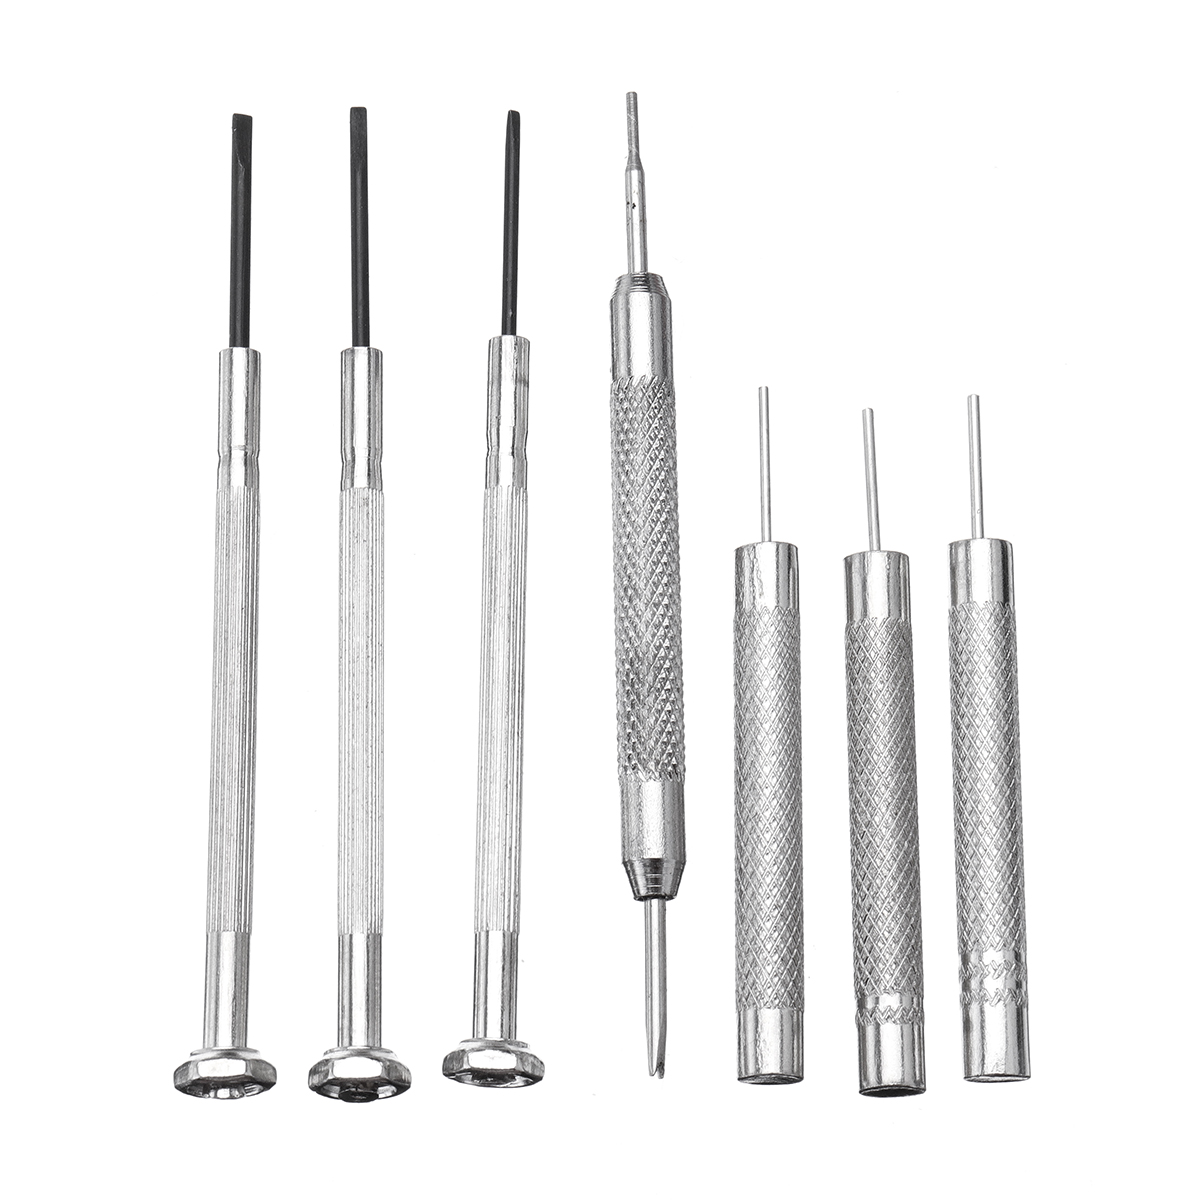 Find 14 in 1 Screwdriver Repair Tool Sets For Watch Repair for Sale on Gipsybee.com with cryptocurrencies